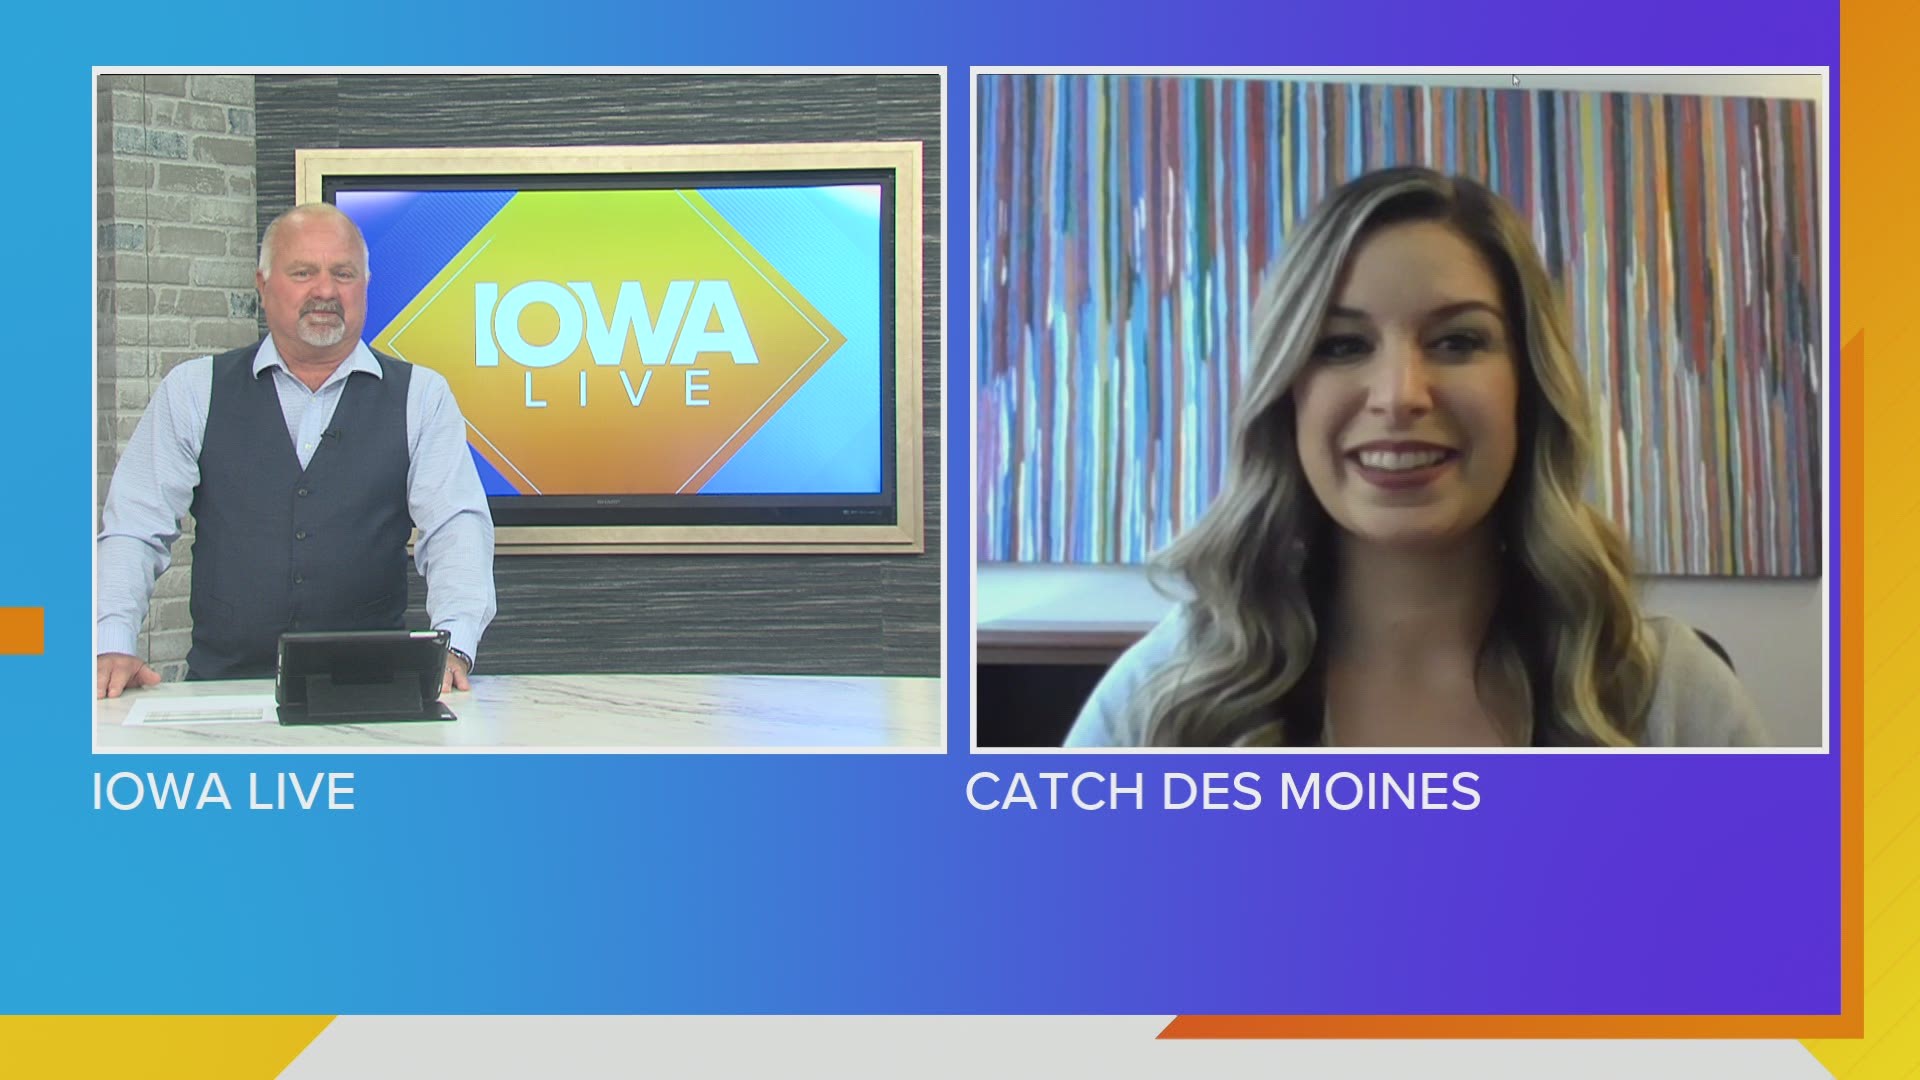 Catch Des Moines' Alex Wilson has the details on events happening around the area starting with Johnston Green Days starting Thursday to Ironman competition Sunday